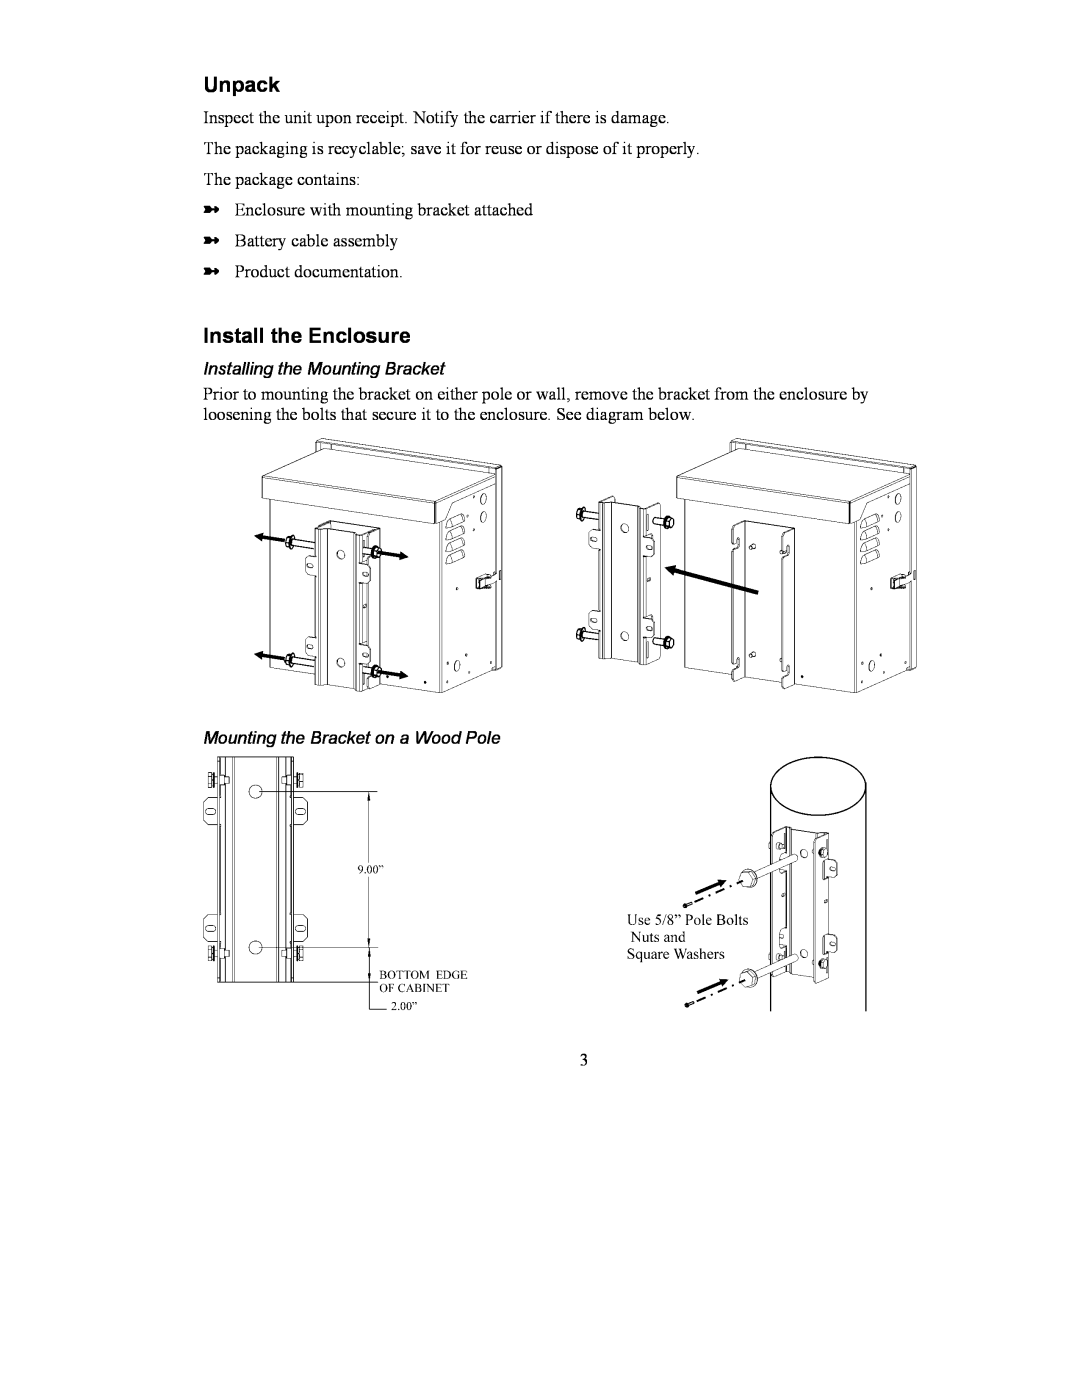 American Power Conversion CP150E48 user manual Unpack, Install the Enclosure, Installing the Mounting Bracket 